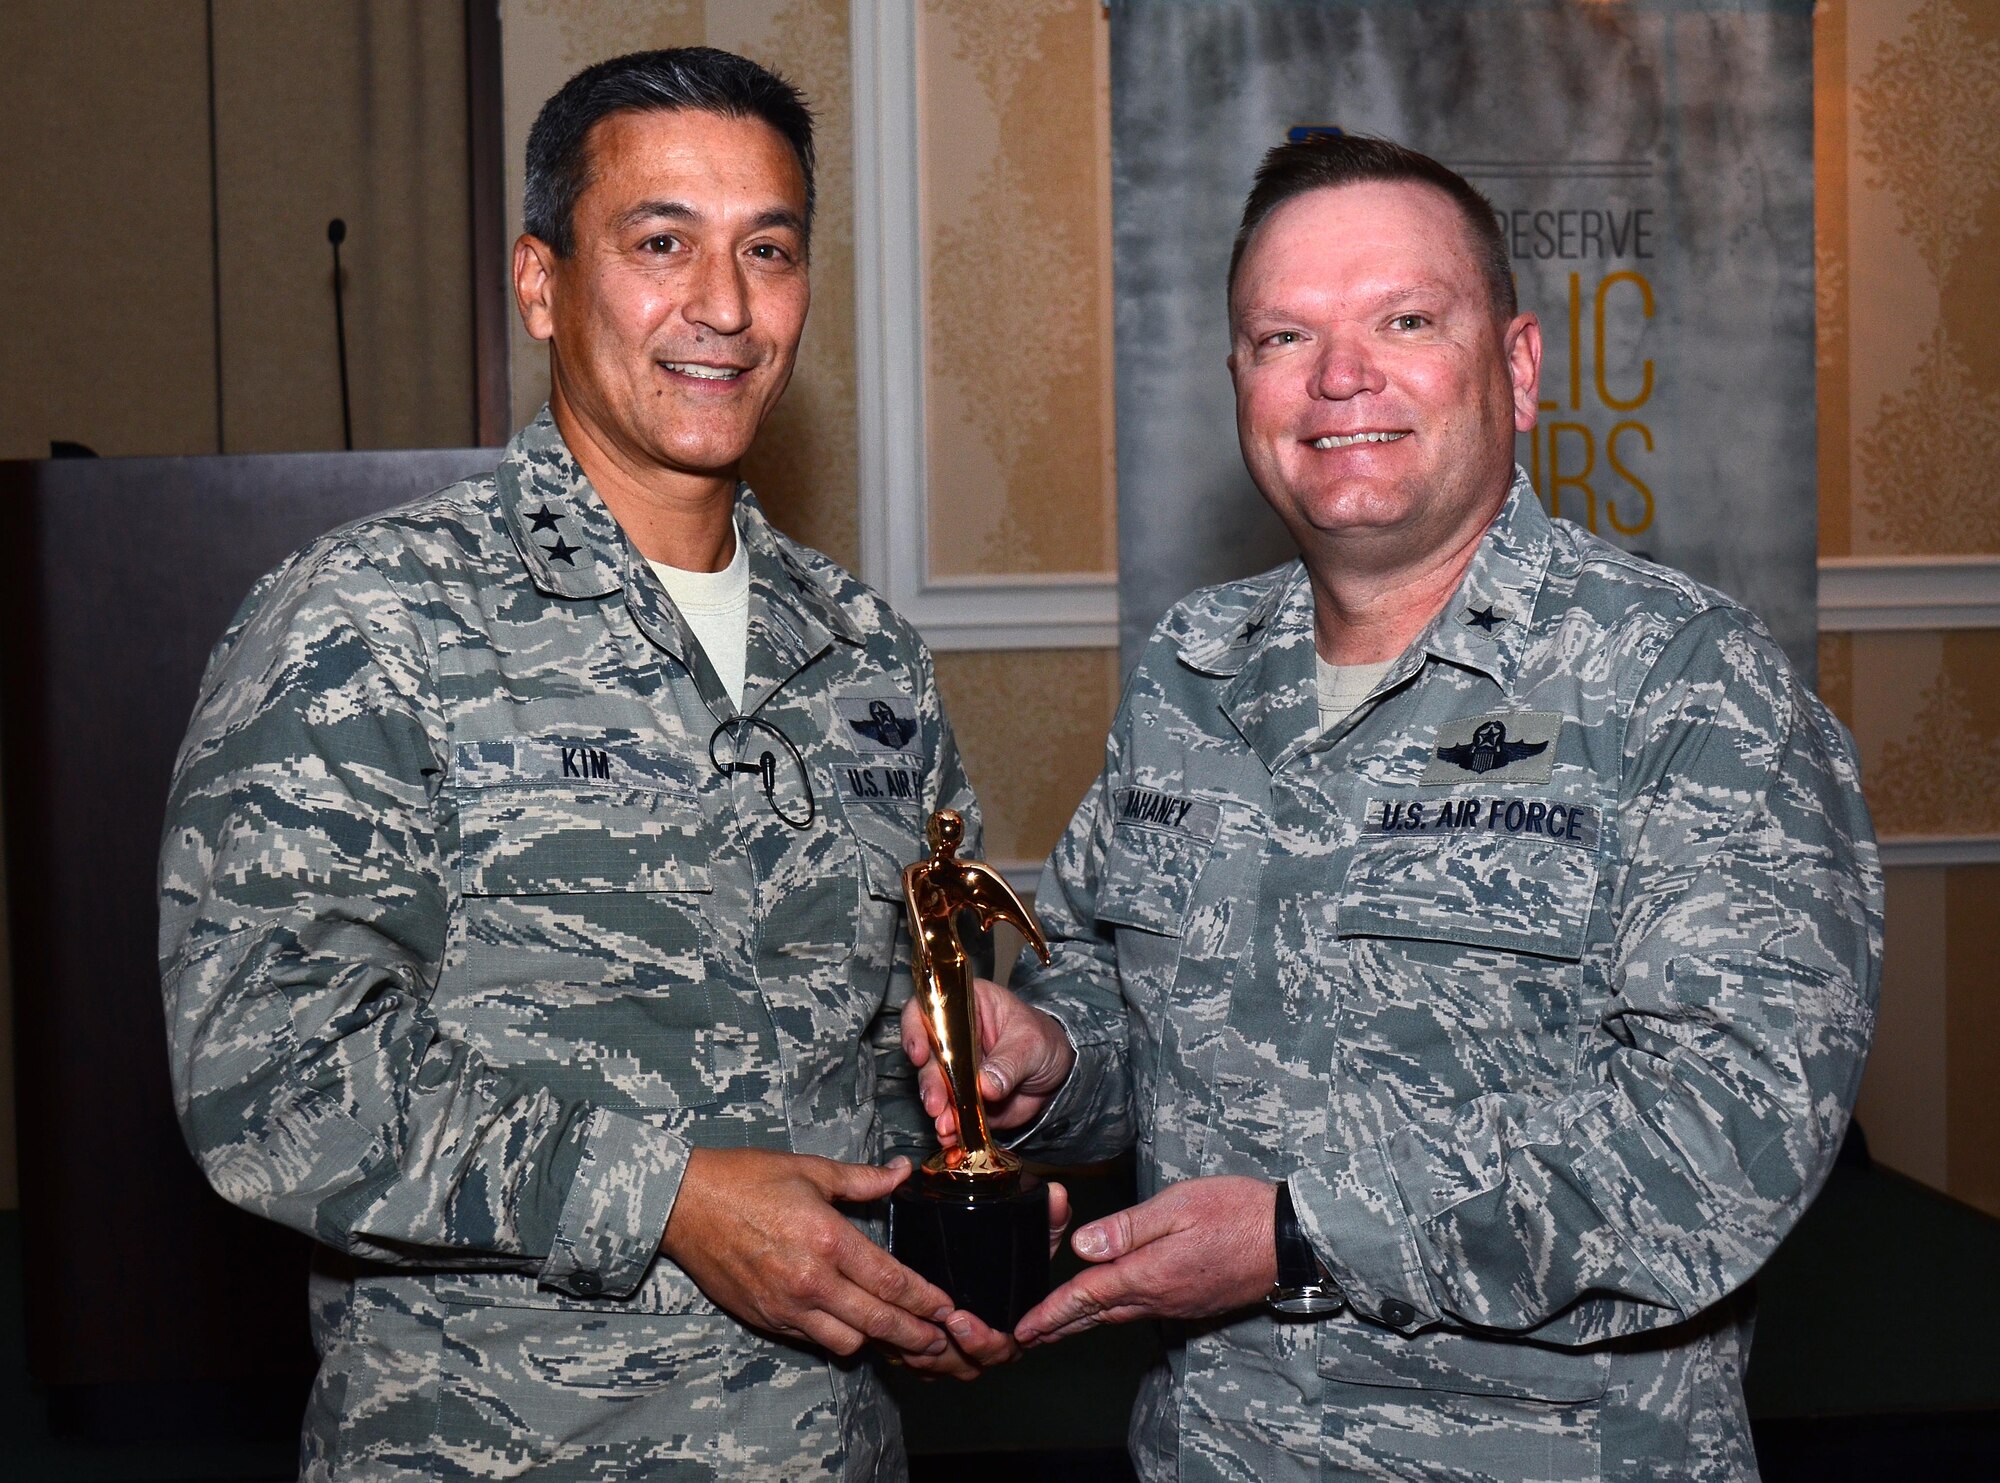 Maj. Gen. Michael Kim, mobilization assistant to the Commander, Air Force Reserve Command, presents the Public Affairs Champion award to Brig. Gen. Samuel "Bo" Mahaney, Air Reserve Personnel Center commander, at the Public Affairs Leadership Symposium held Feb. 9, 2016, in Marietta, Ga. This award recognizes commanders who are highly supportive and involved in the Public Affairs career field. (U.S. Air Force photo/Don Peek)